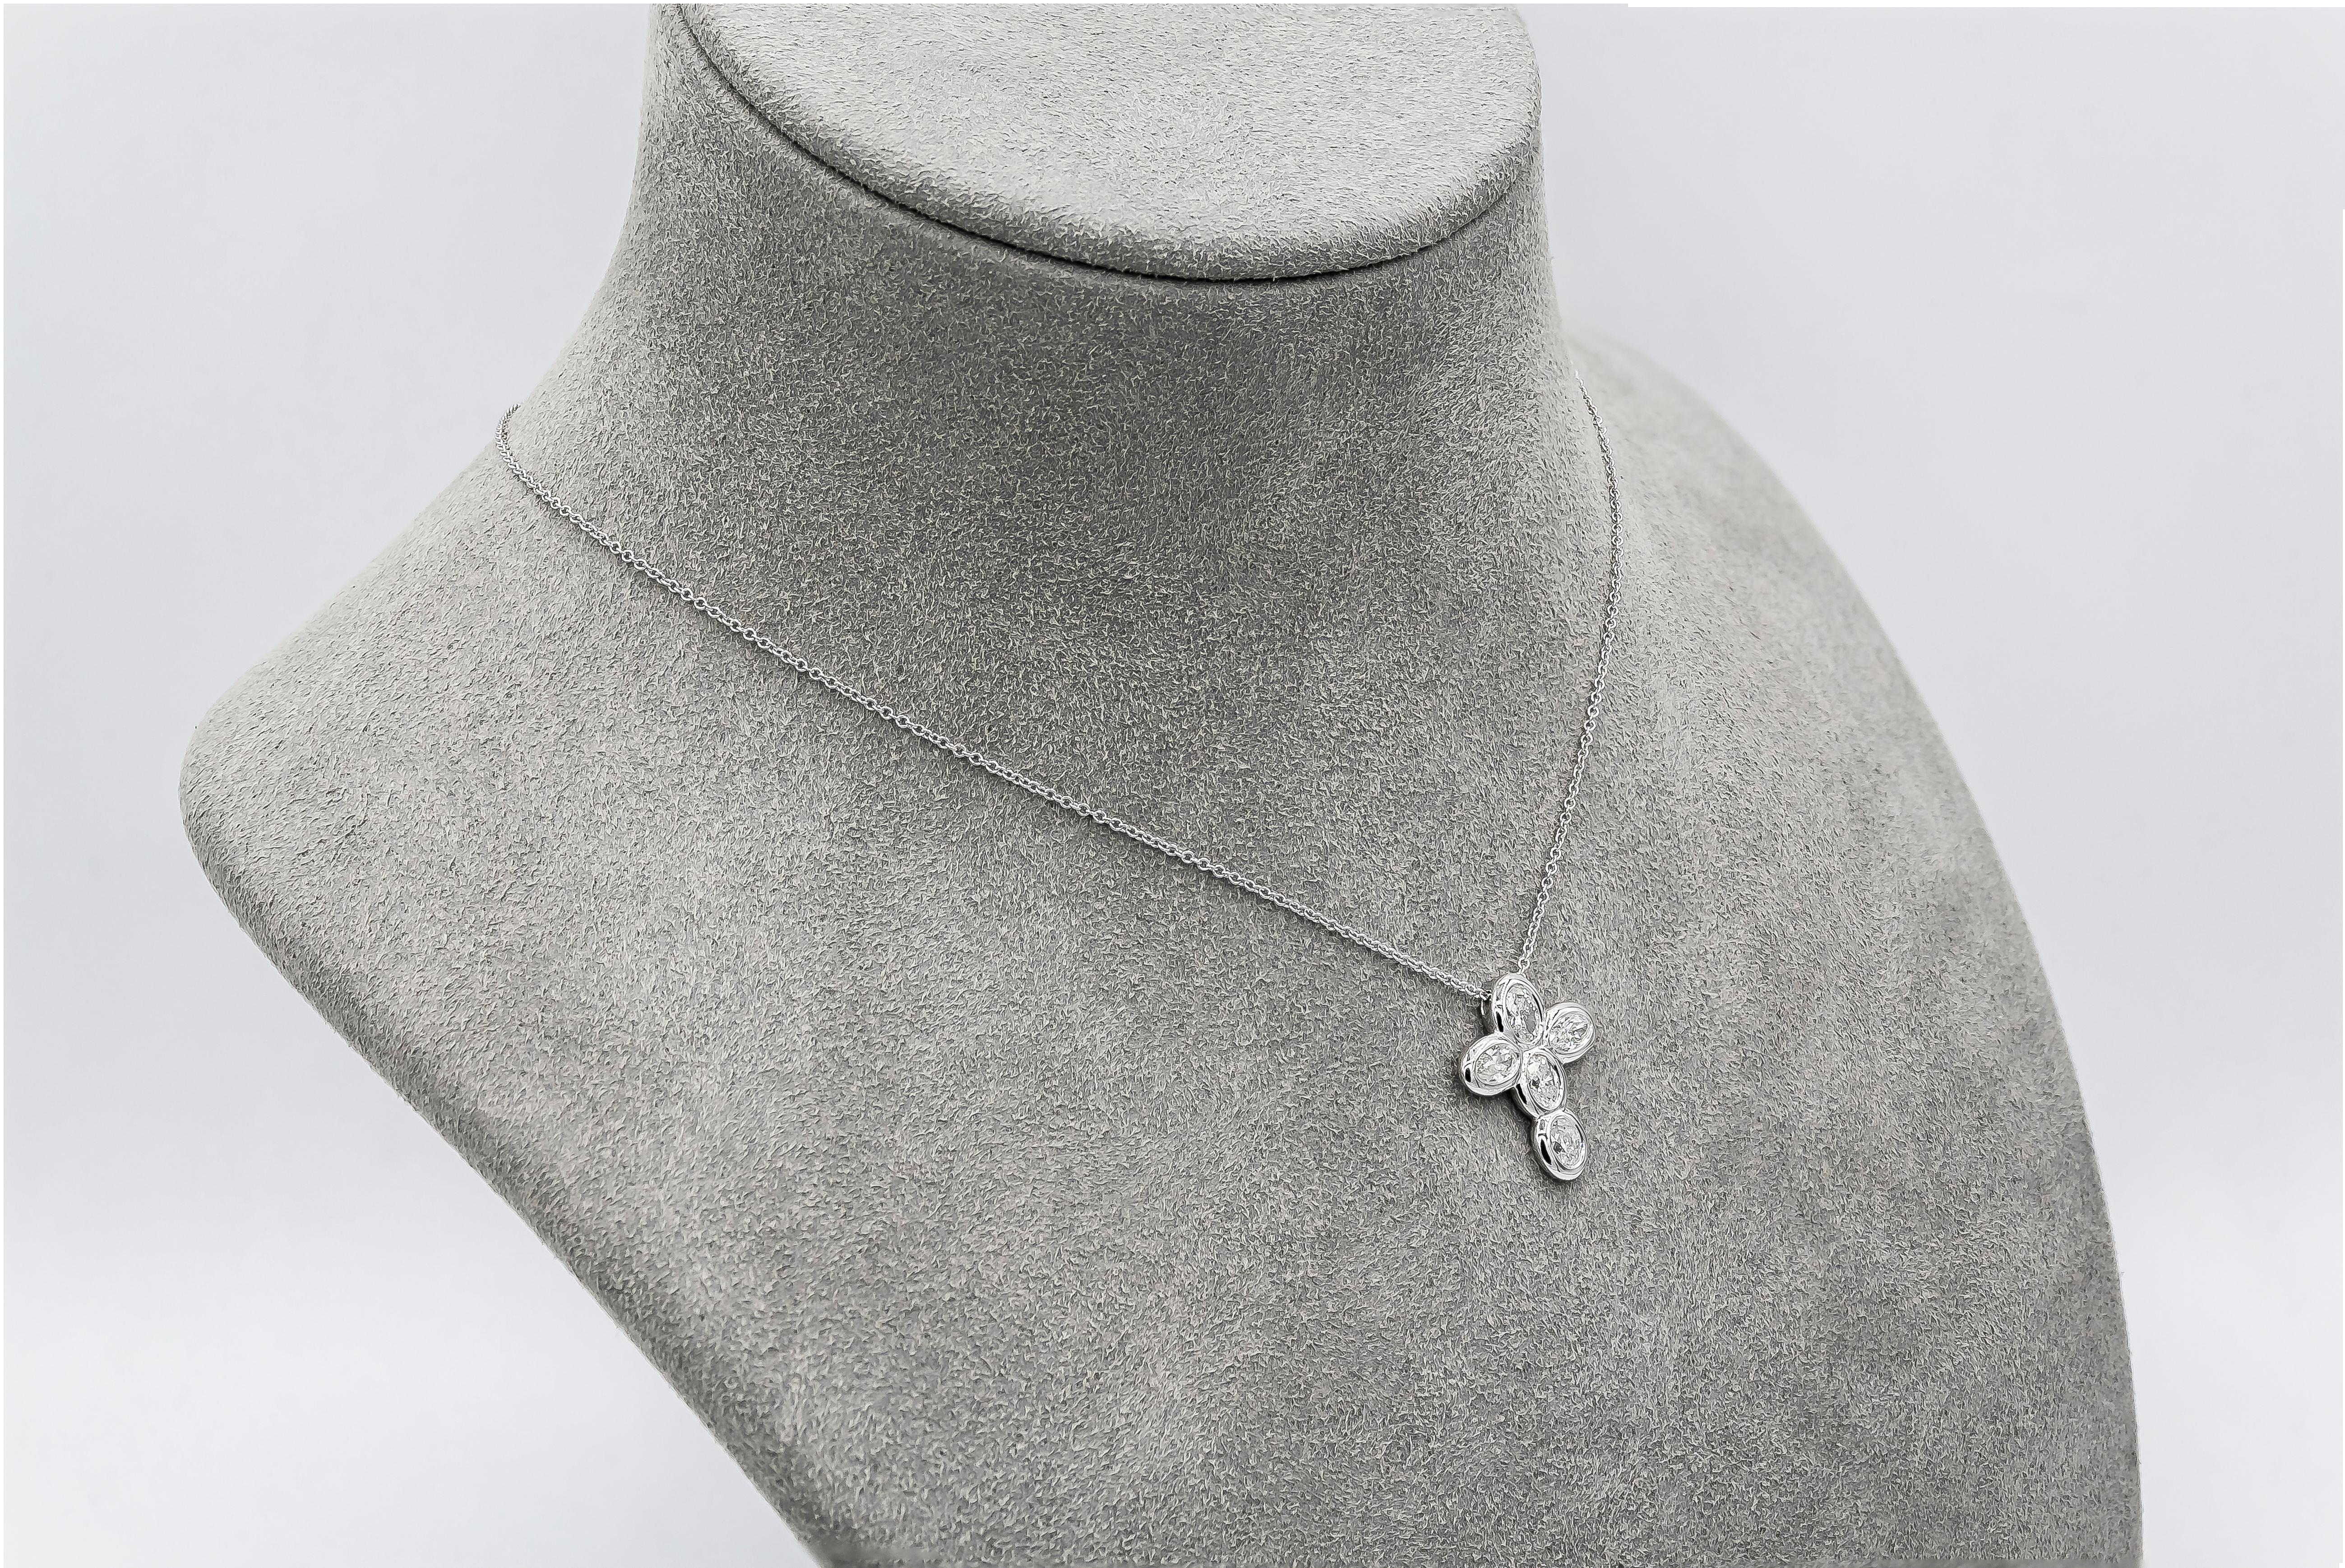 A unique pendant necklace showcasing five oval cut diamonds weighing 0.90 carats total, H color and VS in clarity, bezel set in a cross design. Attached to an 16 inch white gold chain, adjustable upon request.
Length of pendant = 0.72 inches
Width